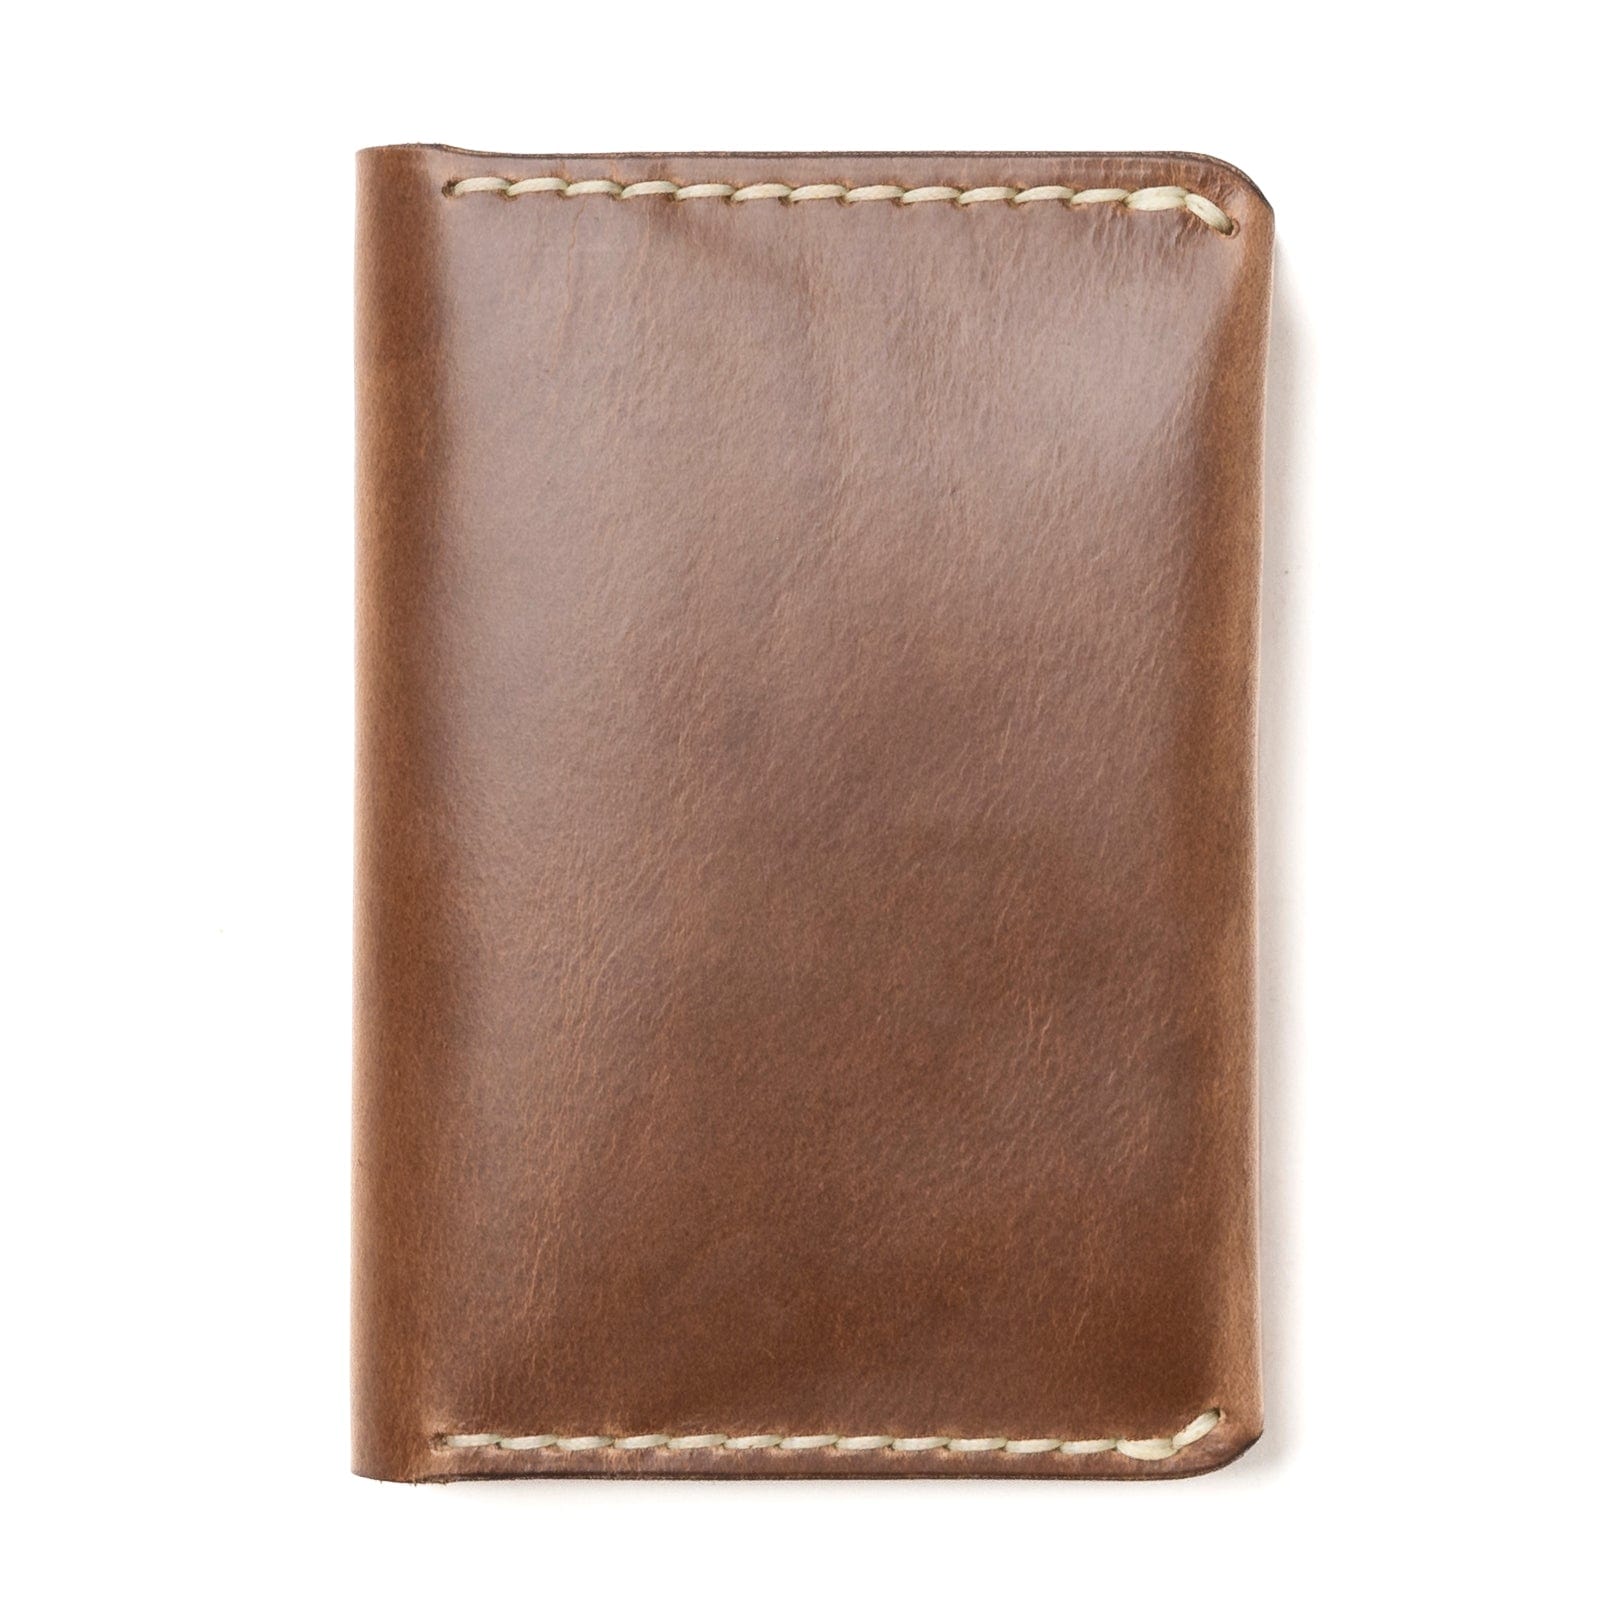 Leather Passport Cover - Natural